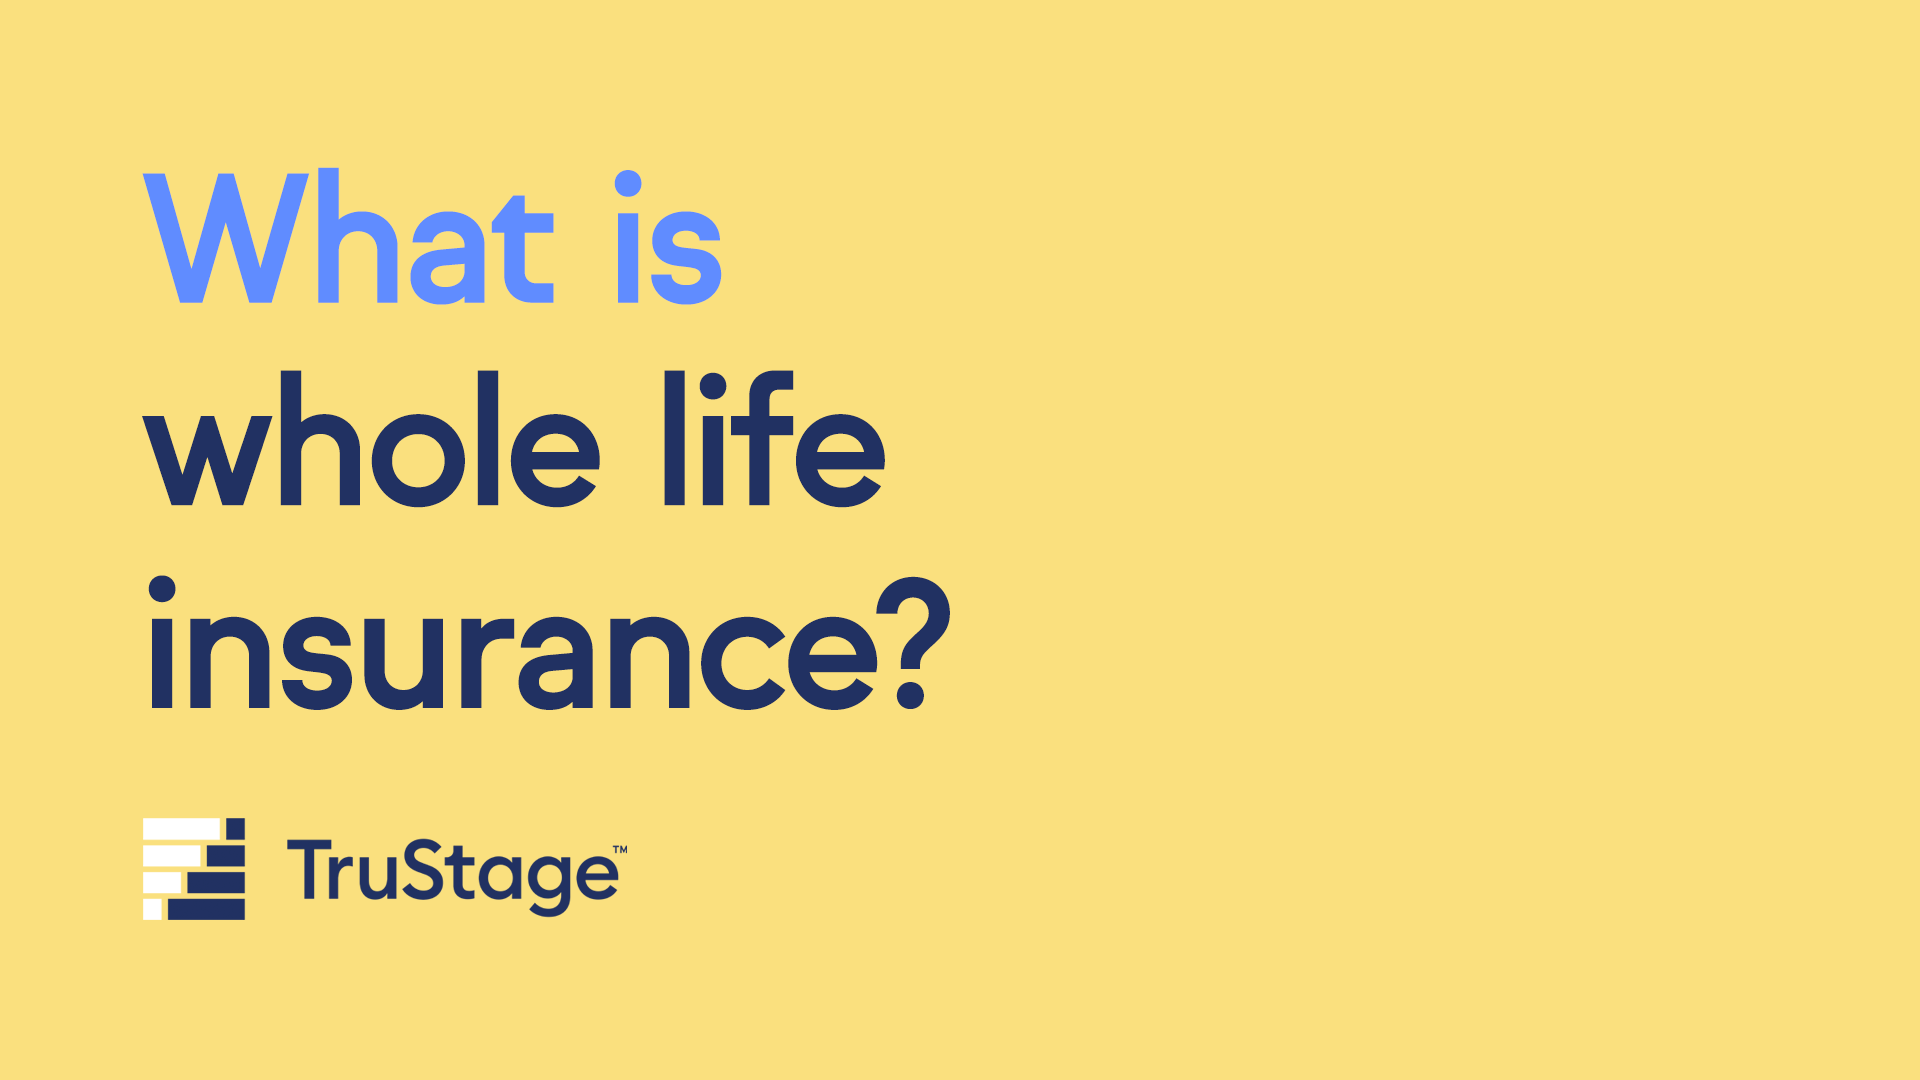 What is whole life insurance explained through video